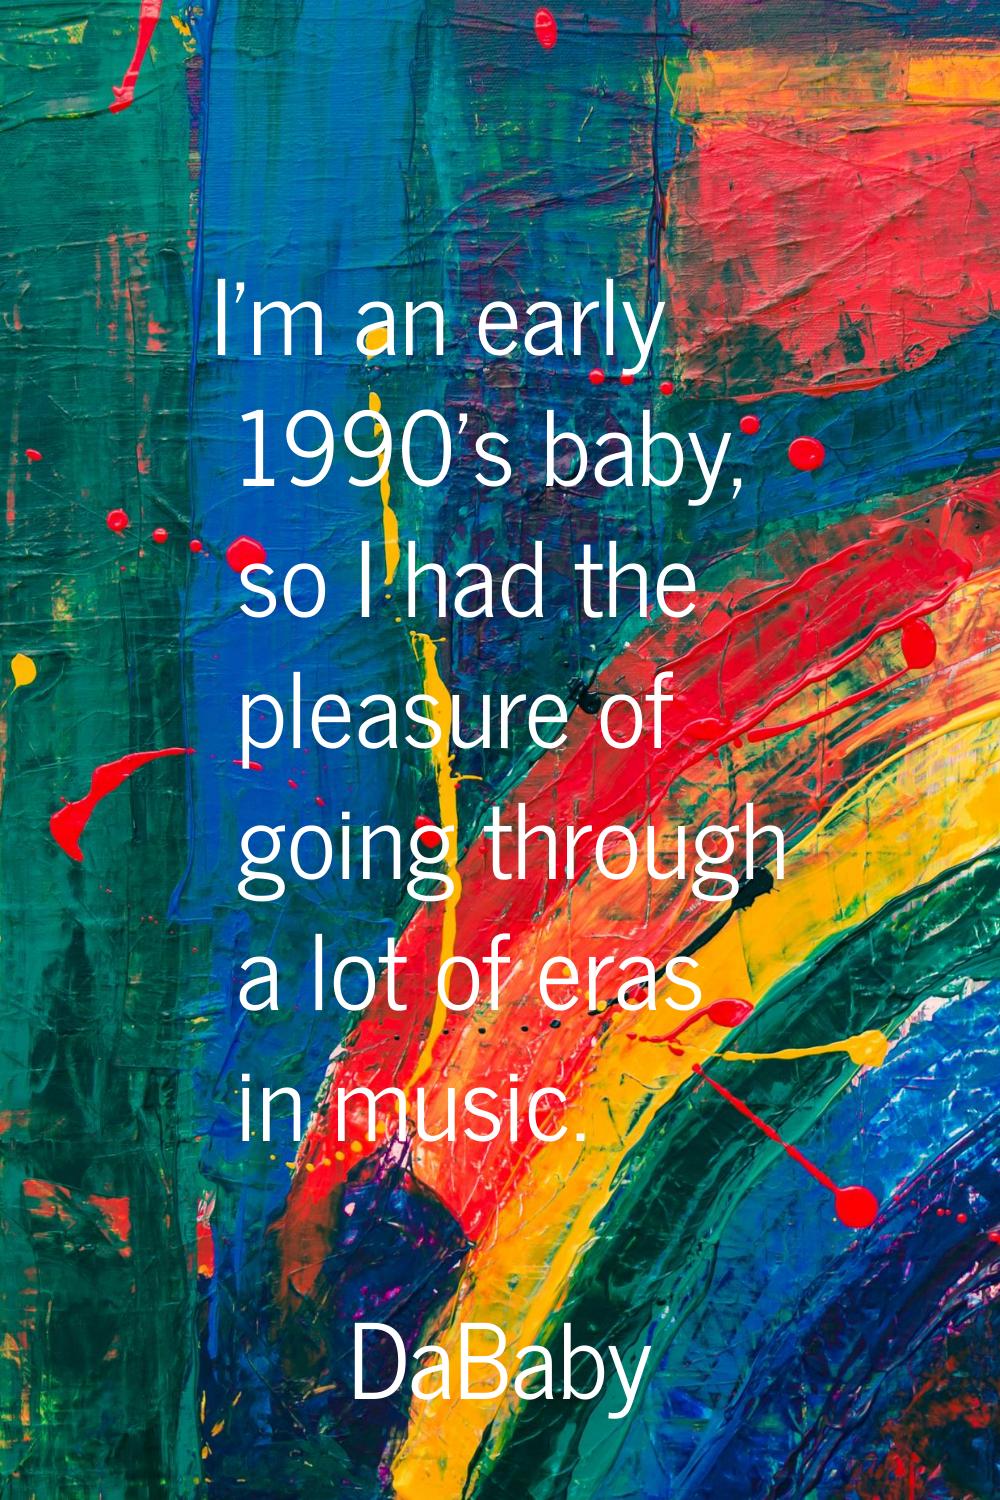 I'm an early 1990's baby, so I had the pleasure of going through a lot of eras in music.